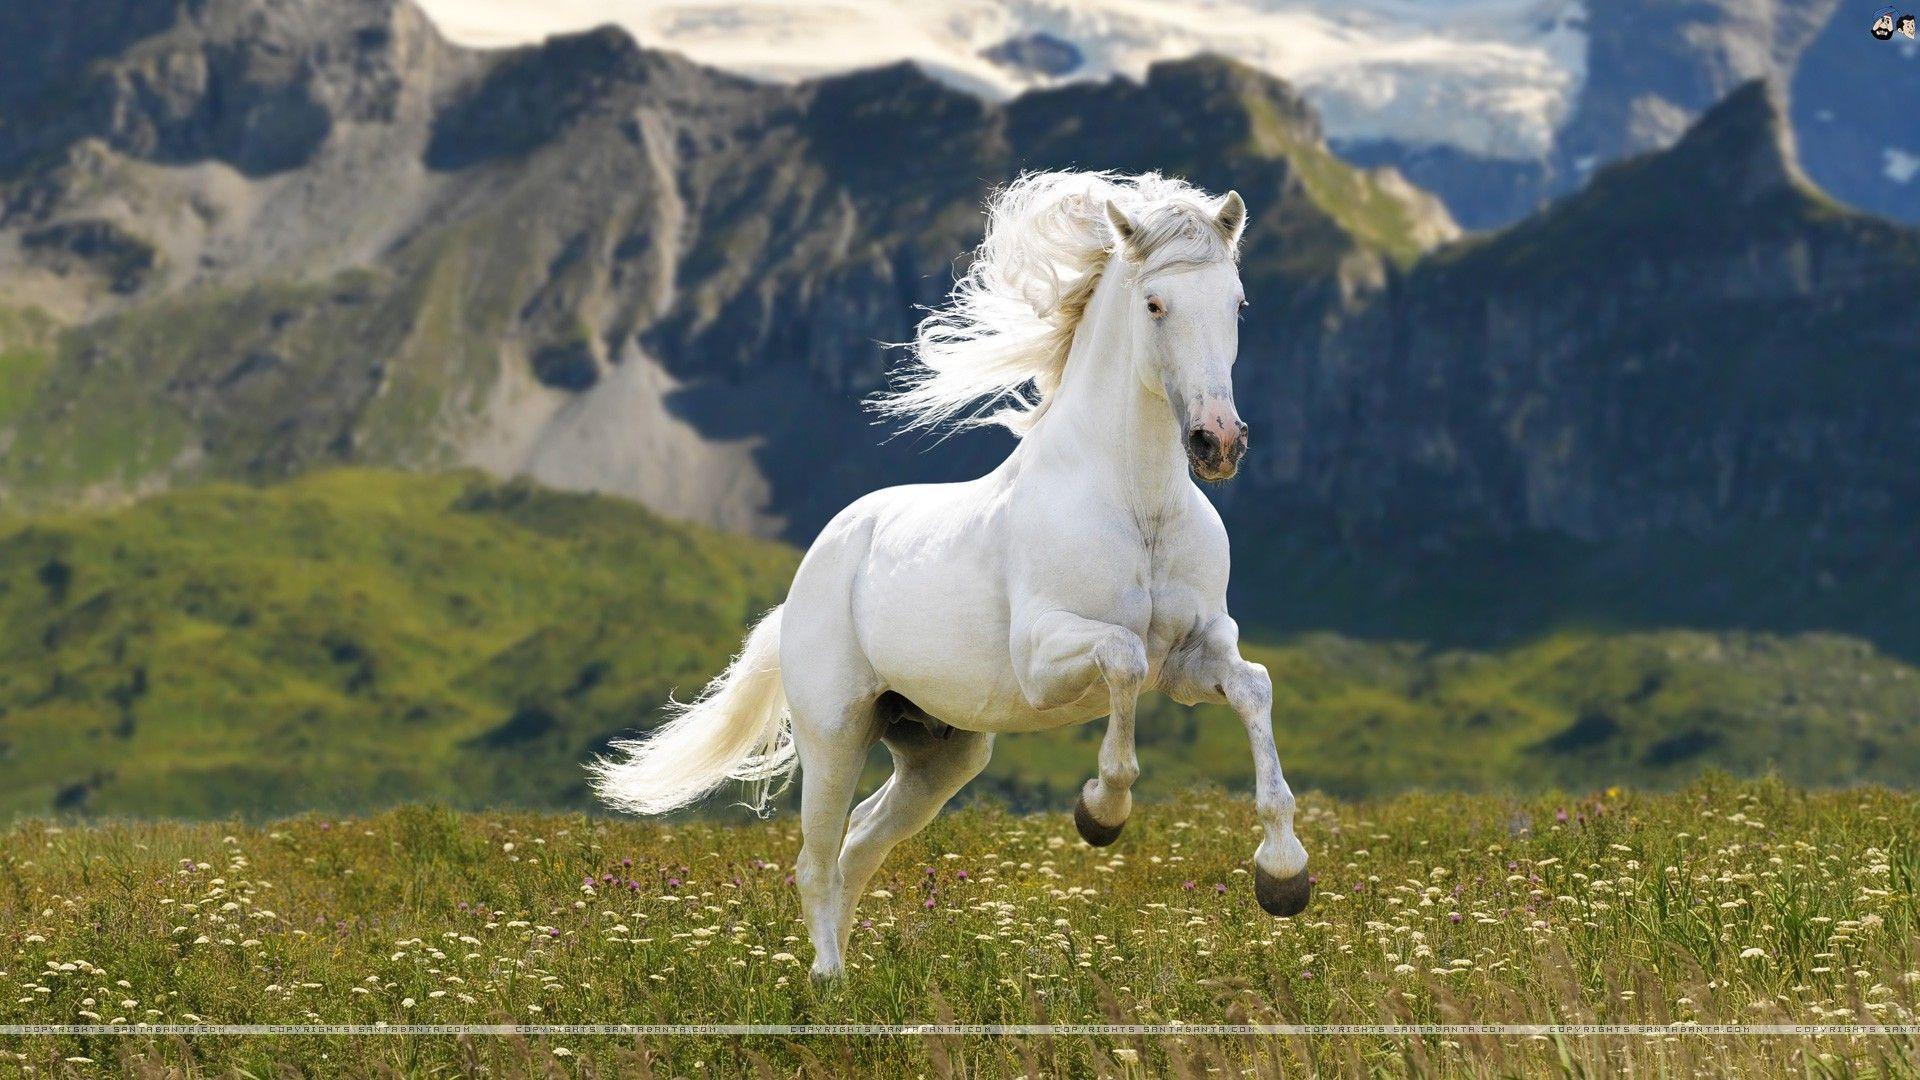 Background Picture Of Horses